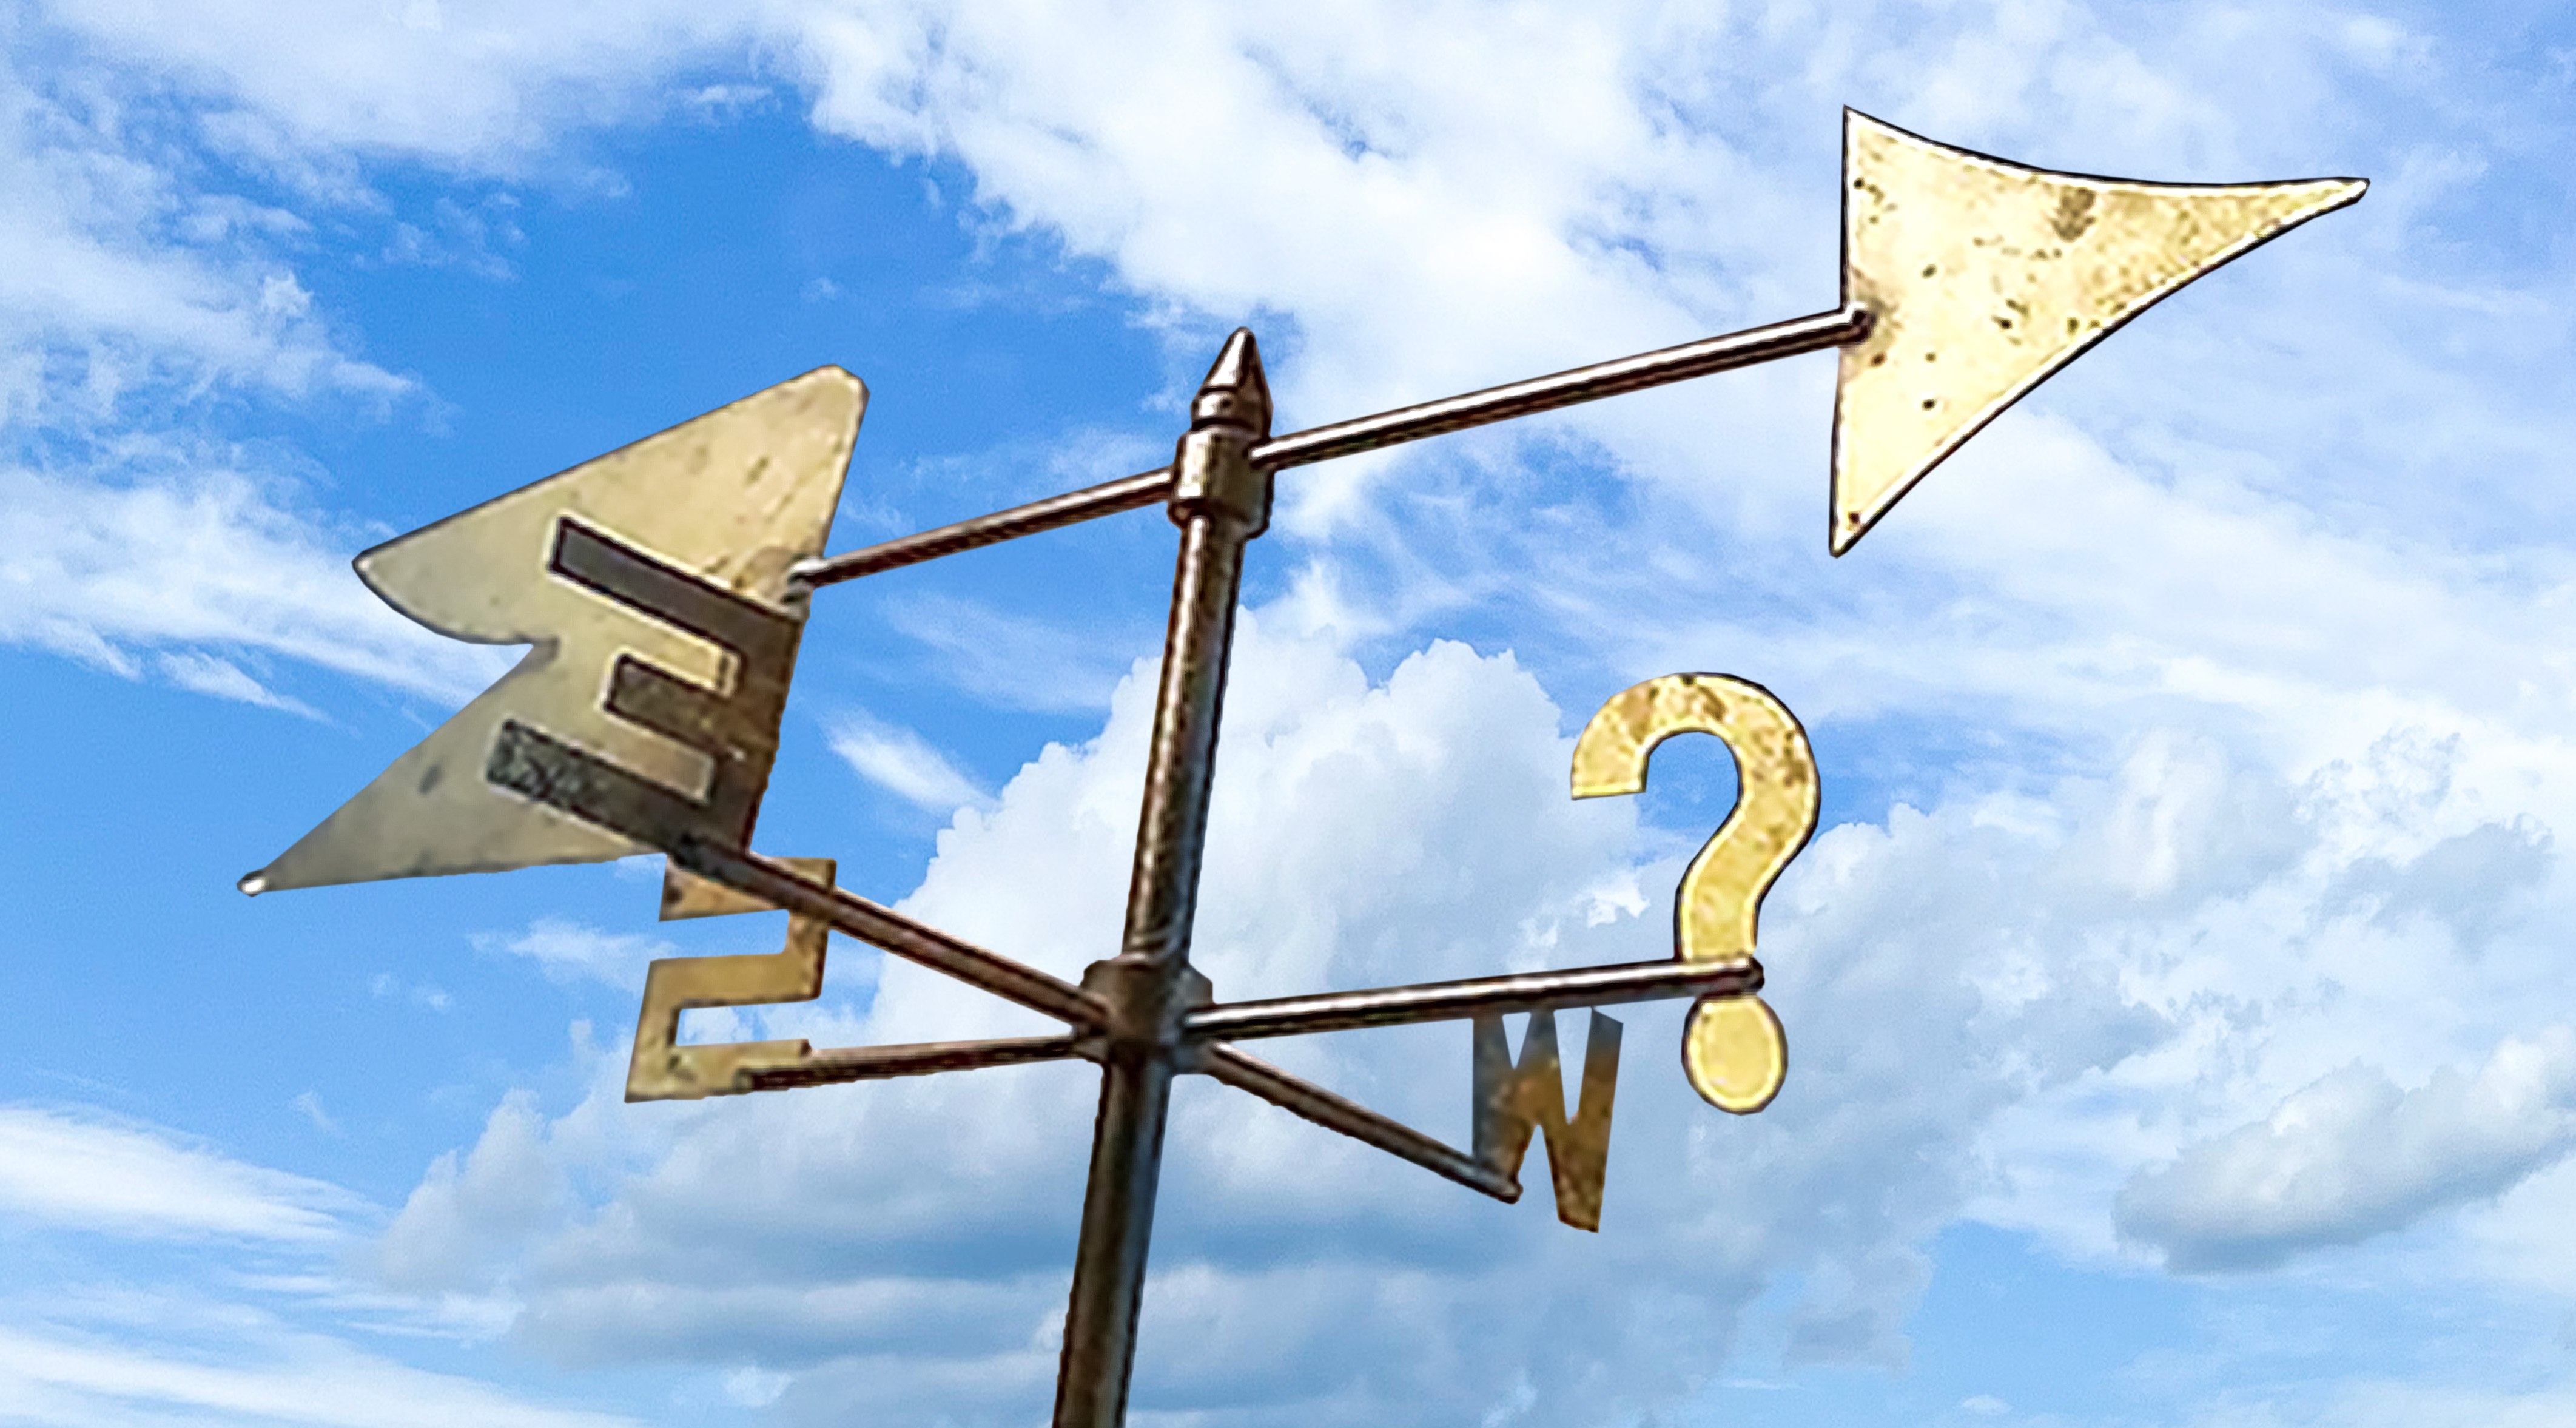 1246-weather-vane-with-question-mark-or